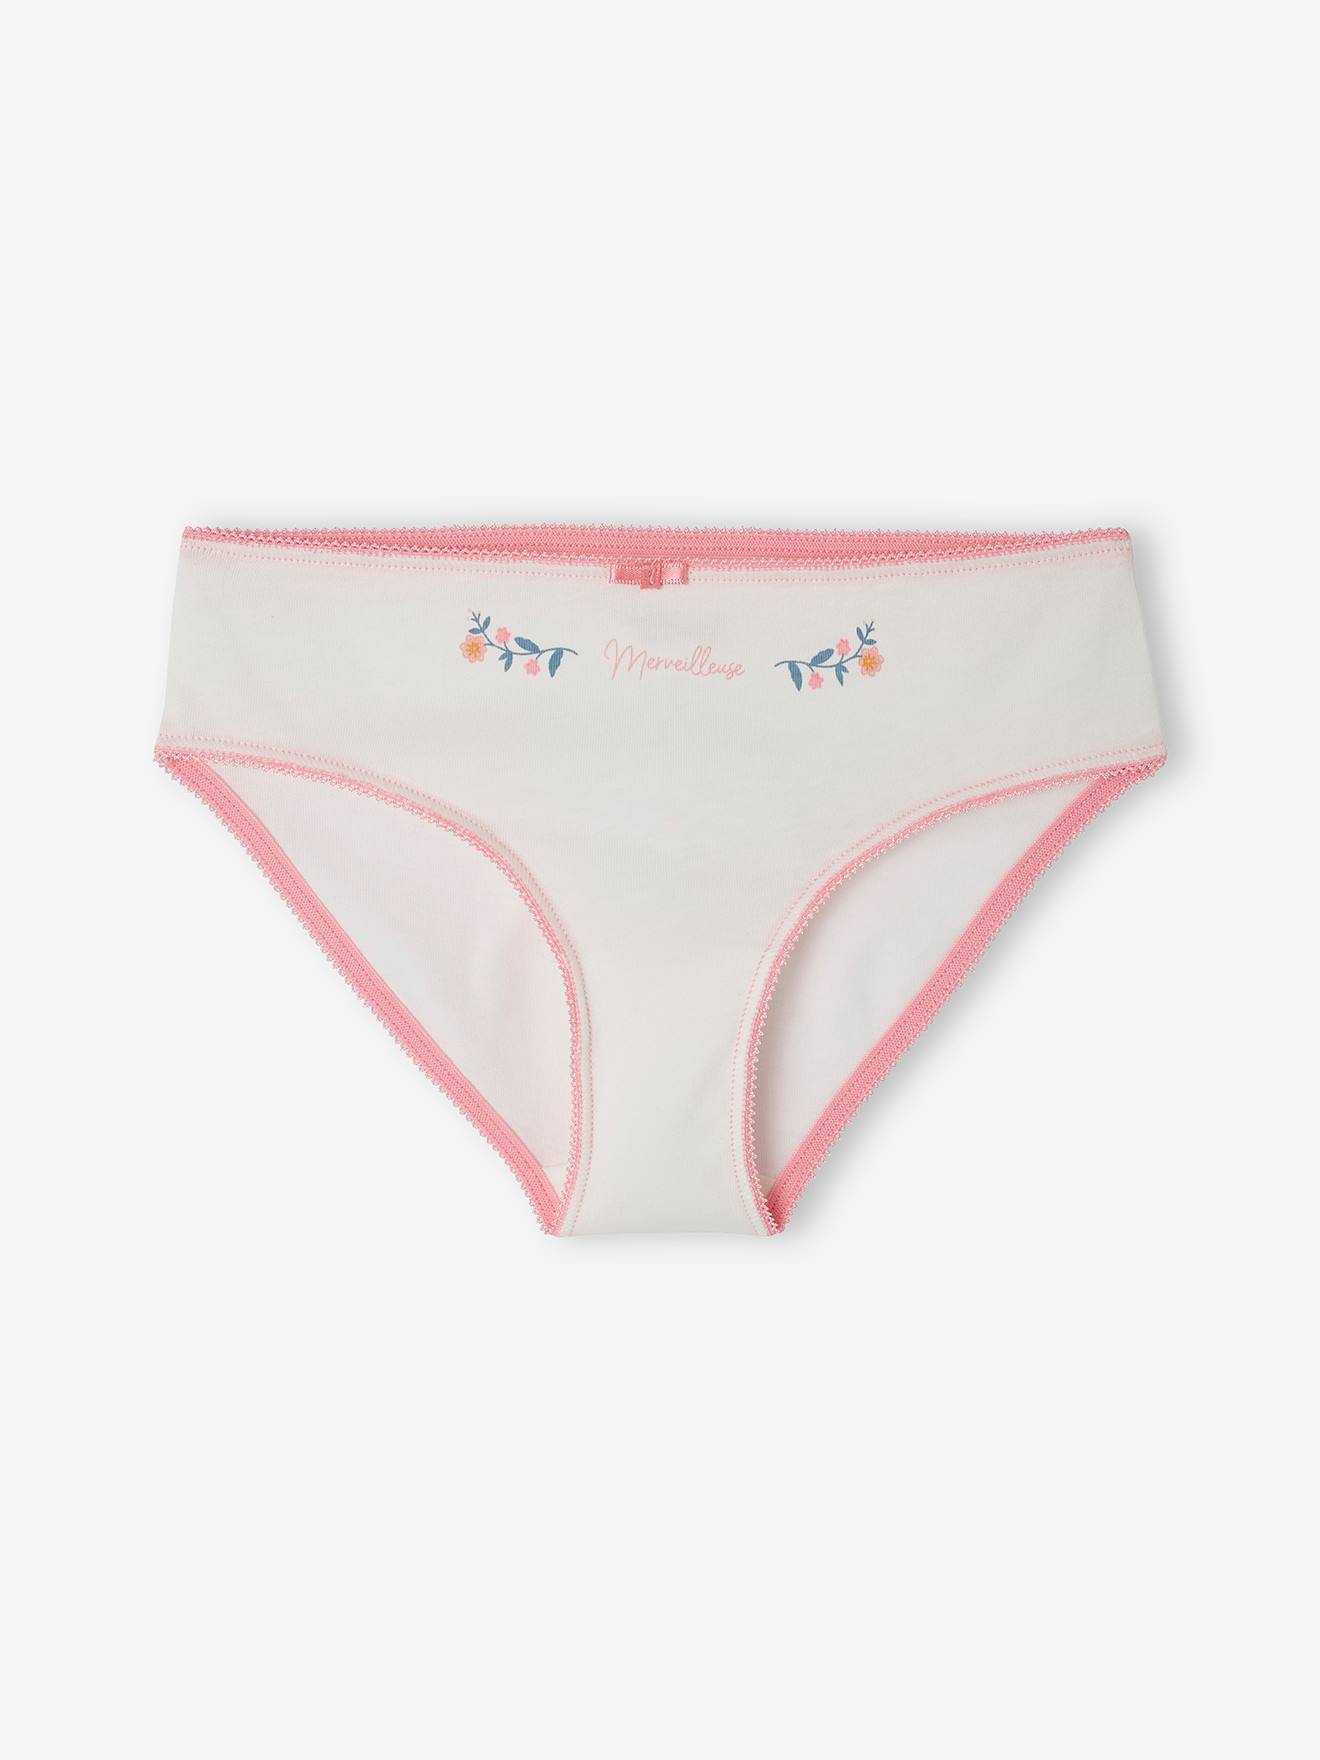 Pack of 5 Briefs in Organic Cotton, Hearts & Unicorns, for Girls